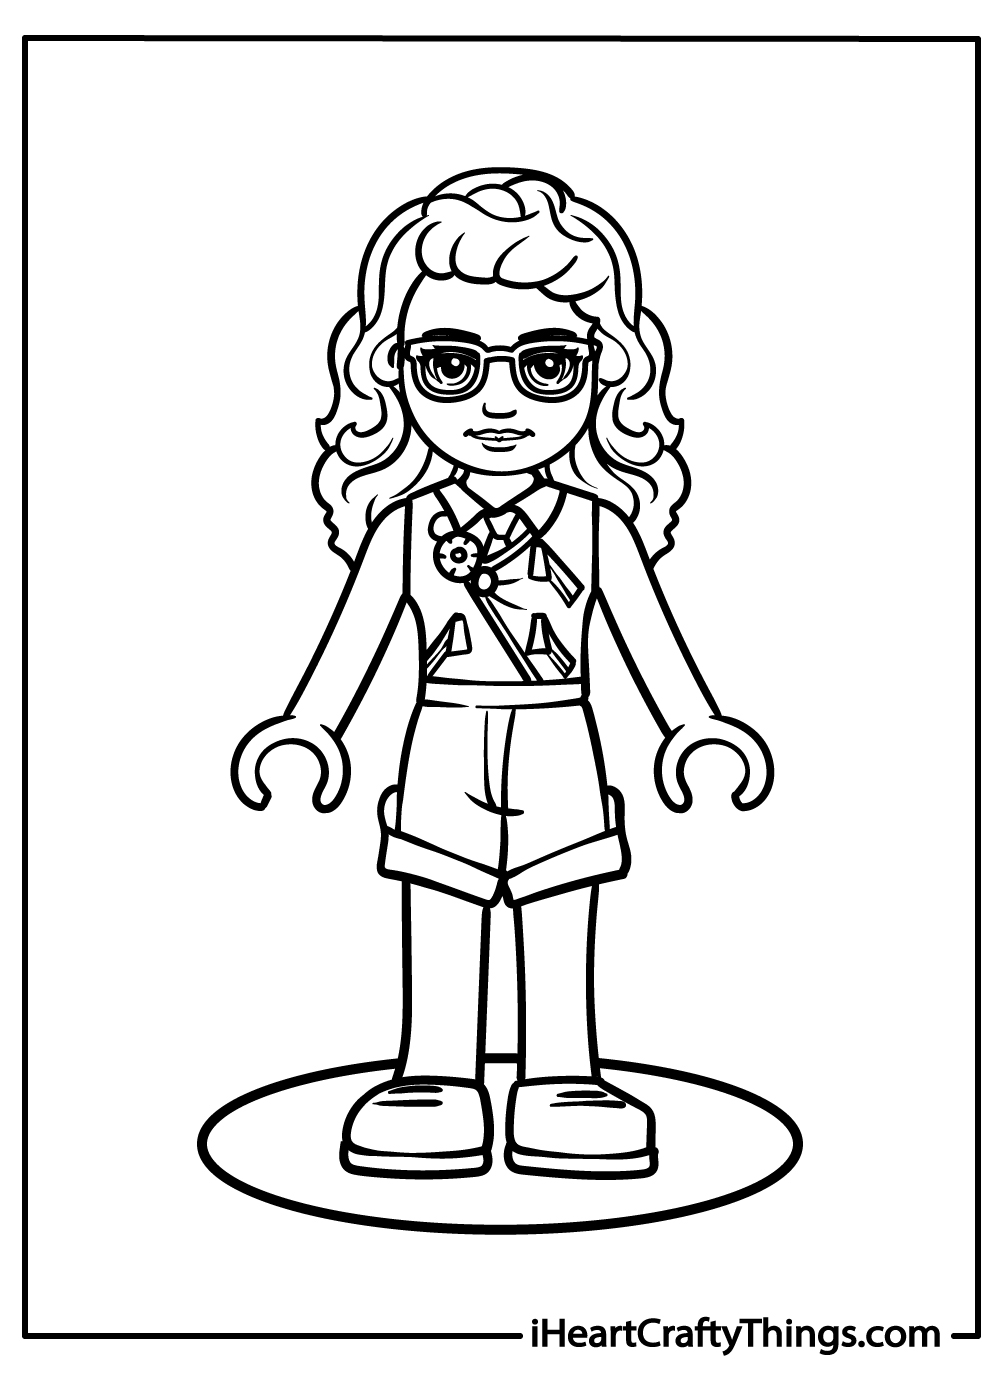 andrea lego friends coloring pages